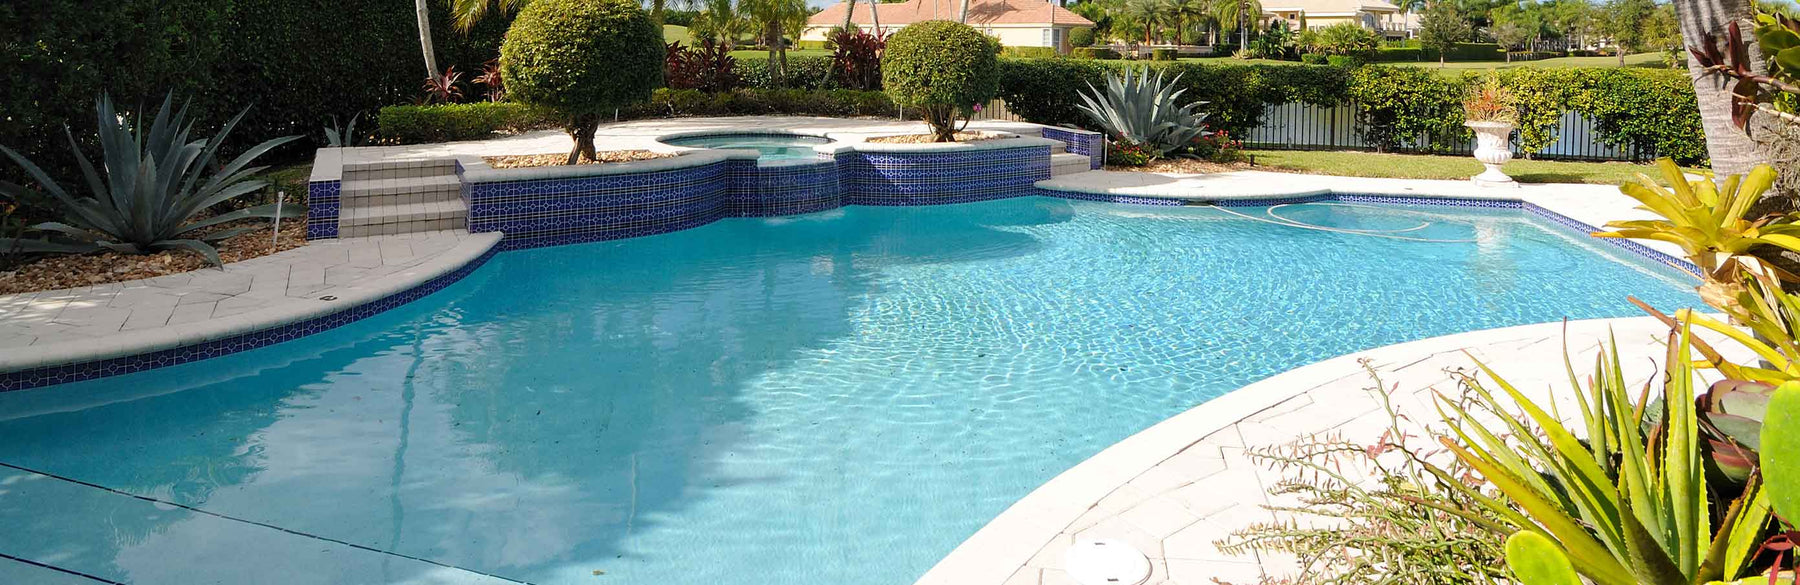 How To Get Your Pool Ready For Summer In 10 Simple Steps - Great Backyard Place